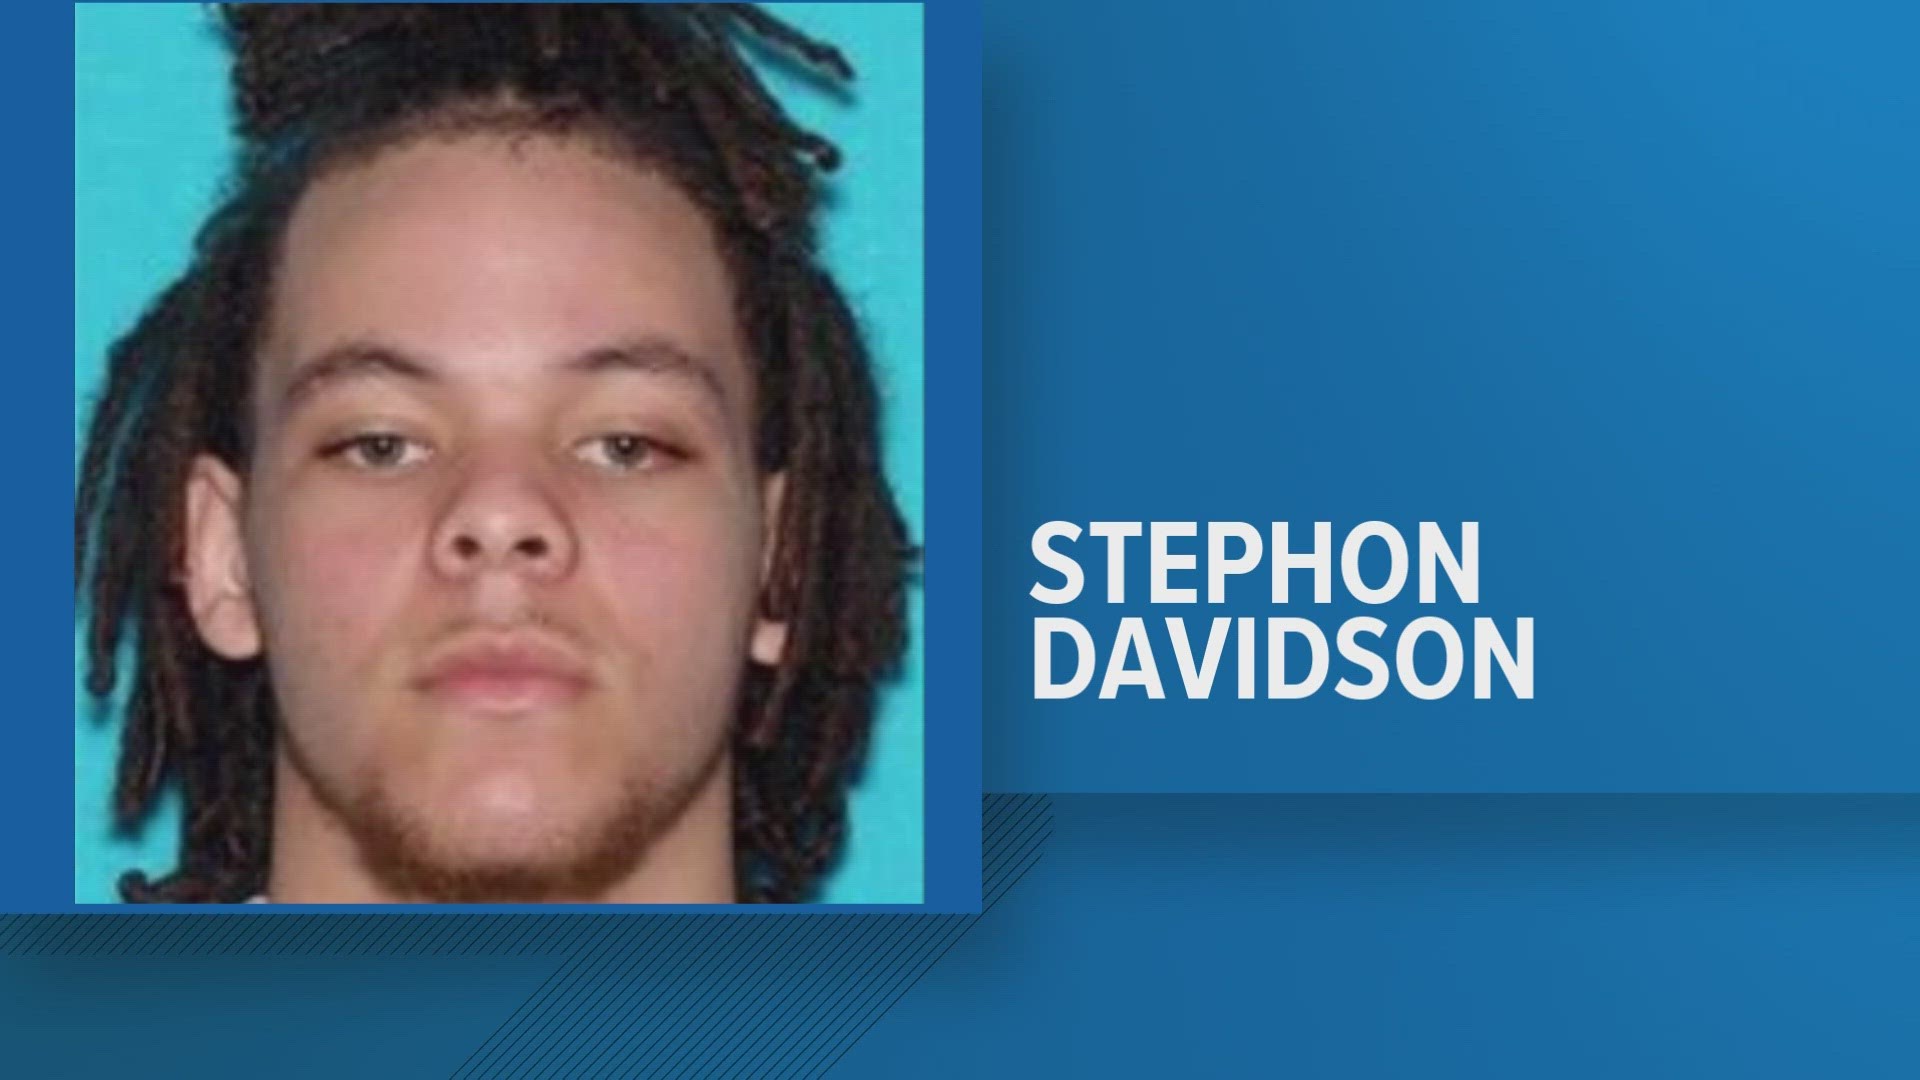 Knox County Deputies arrested Stephon Davidson this afternoon at a motel on Asheville Highway.